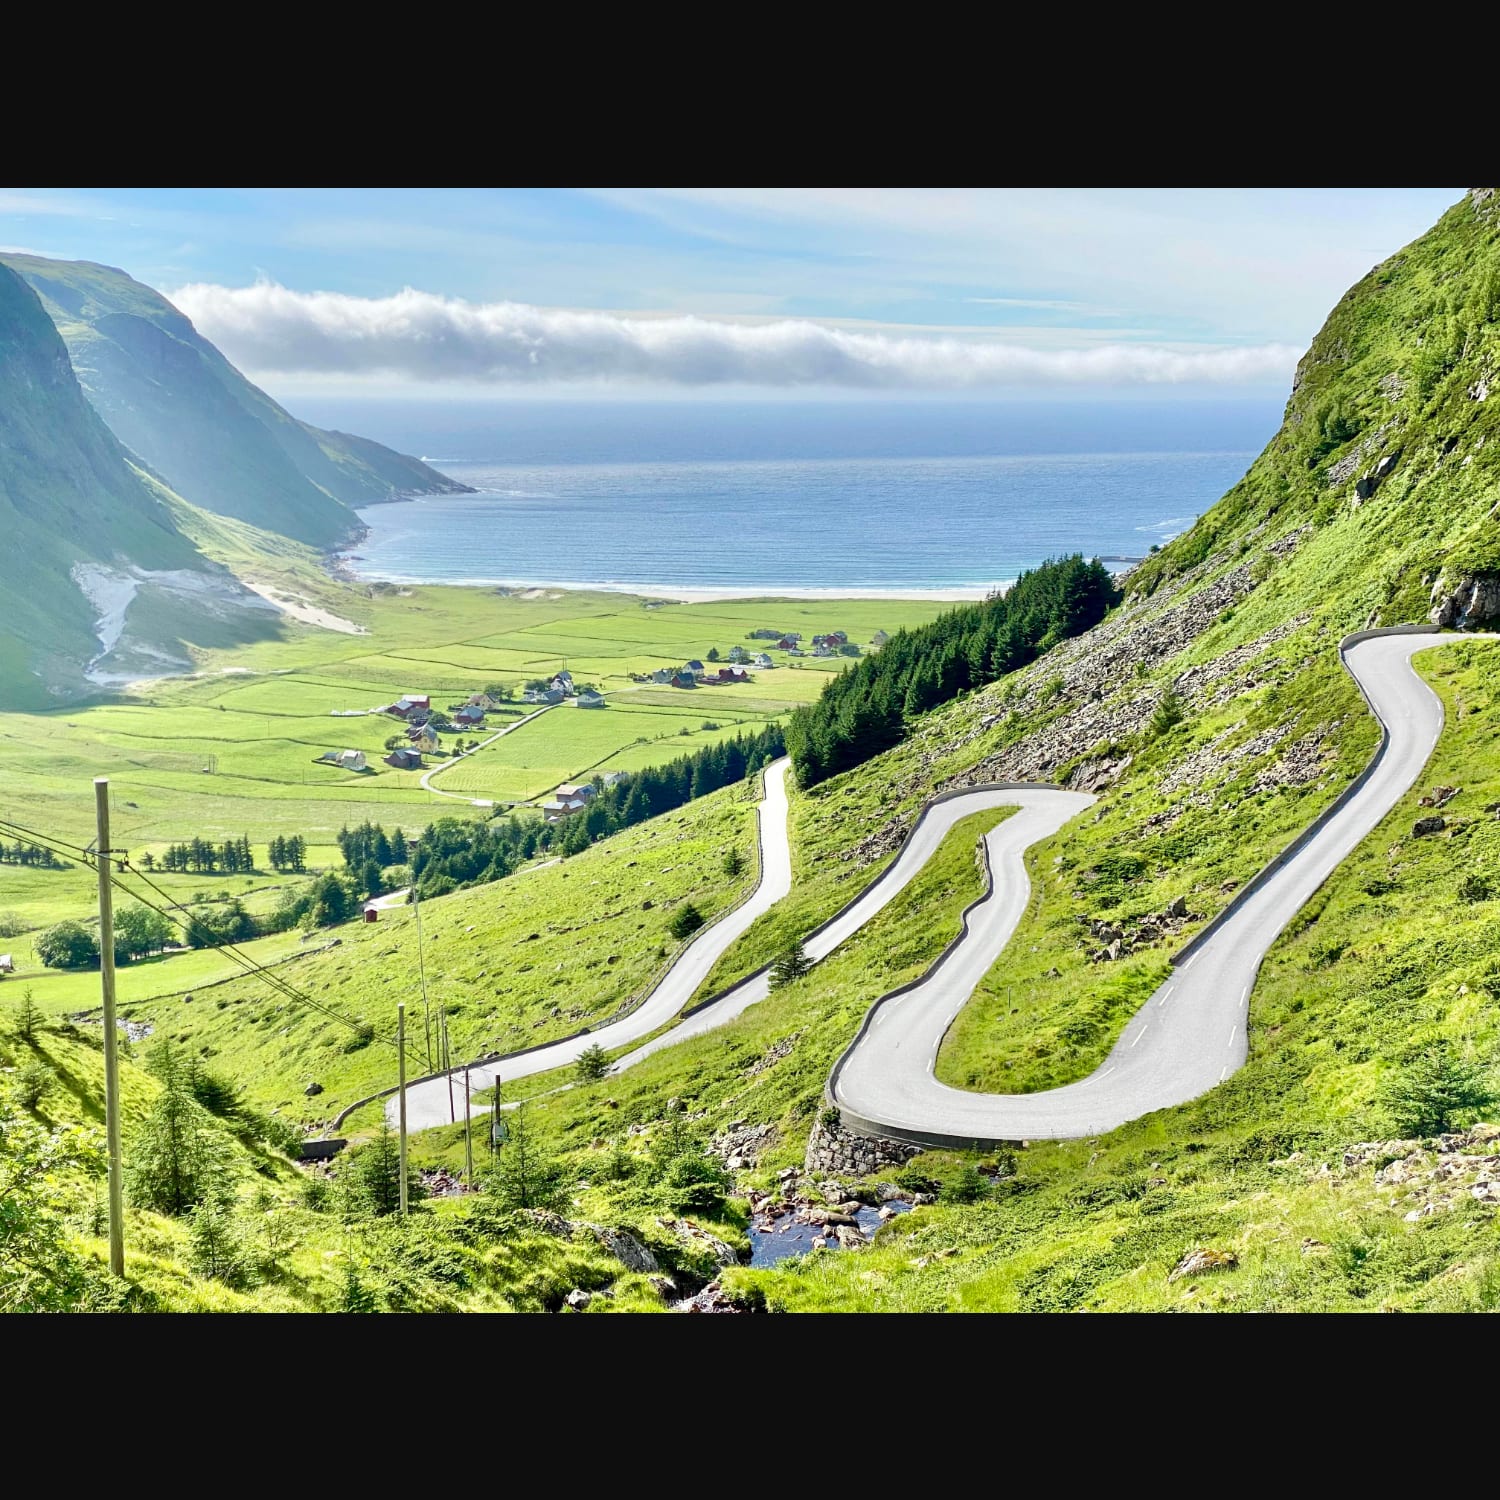 Hoddevik, Norway. Winding mountain roads leading to a spectacular surfers beach on the west coast.